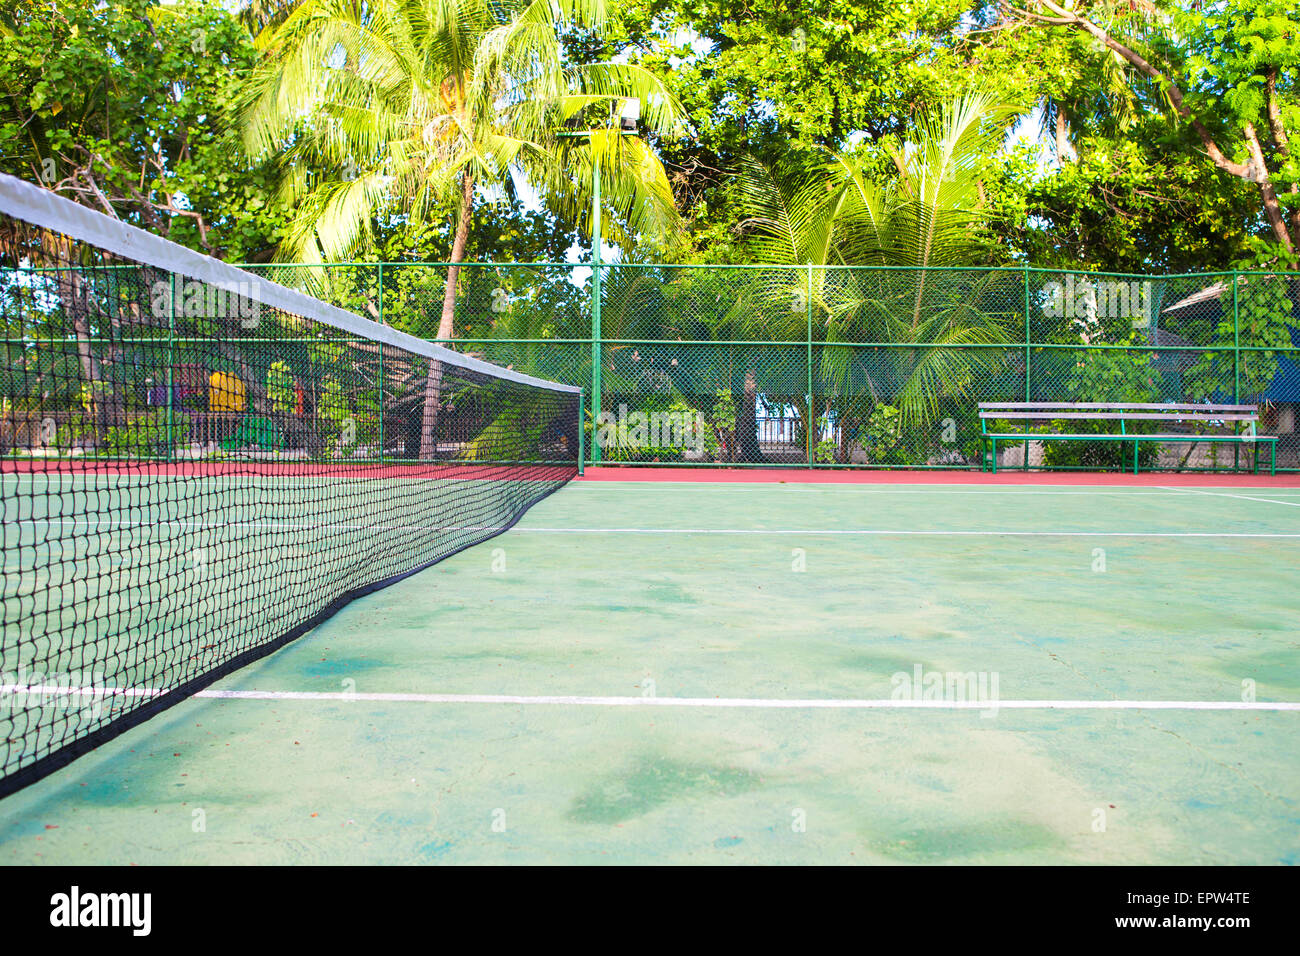 Tennis court on exotic tropical island - sport background Stock Photo -  Alamy